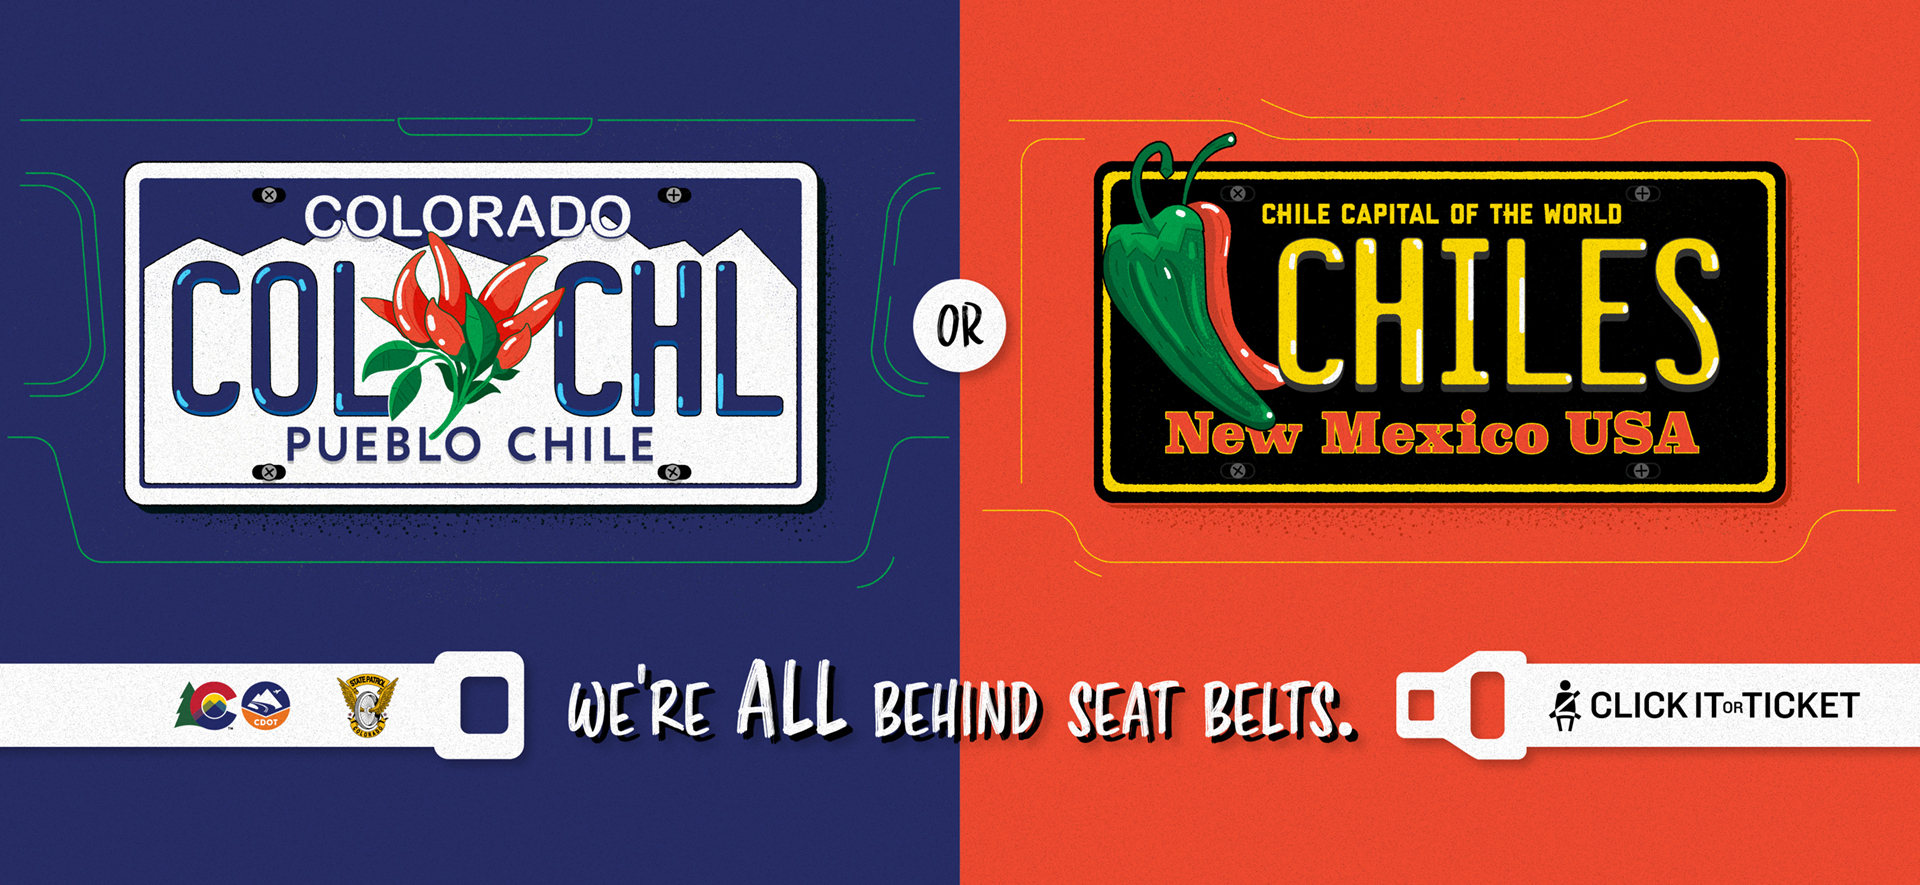 We're All Behind Seat Belts - Chiles detail image